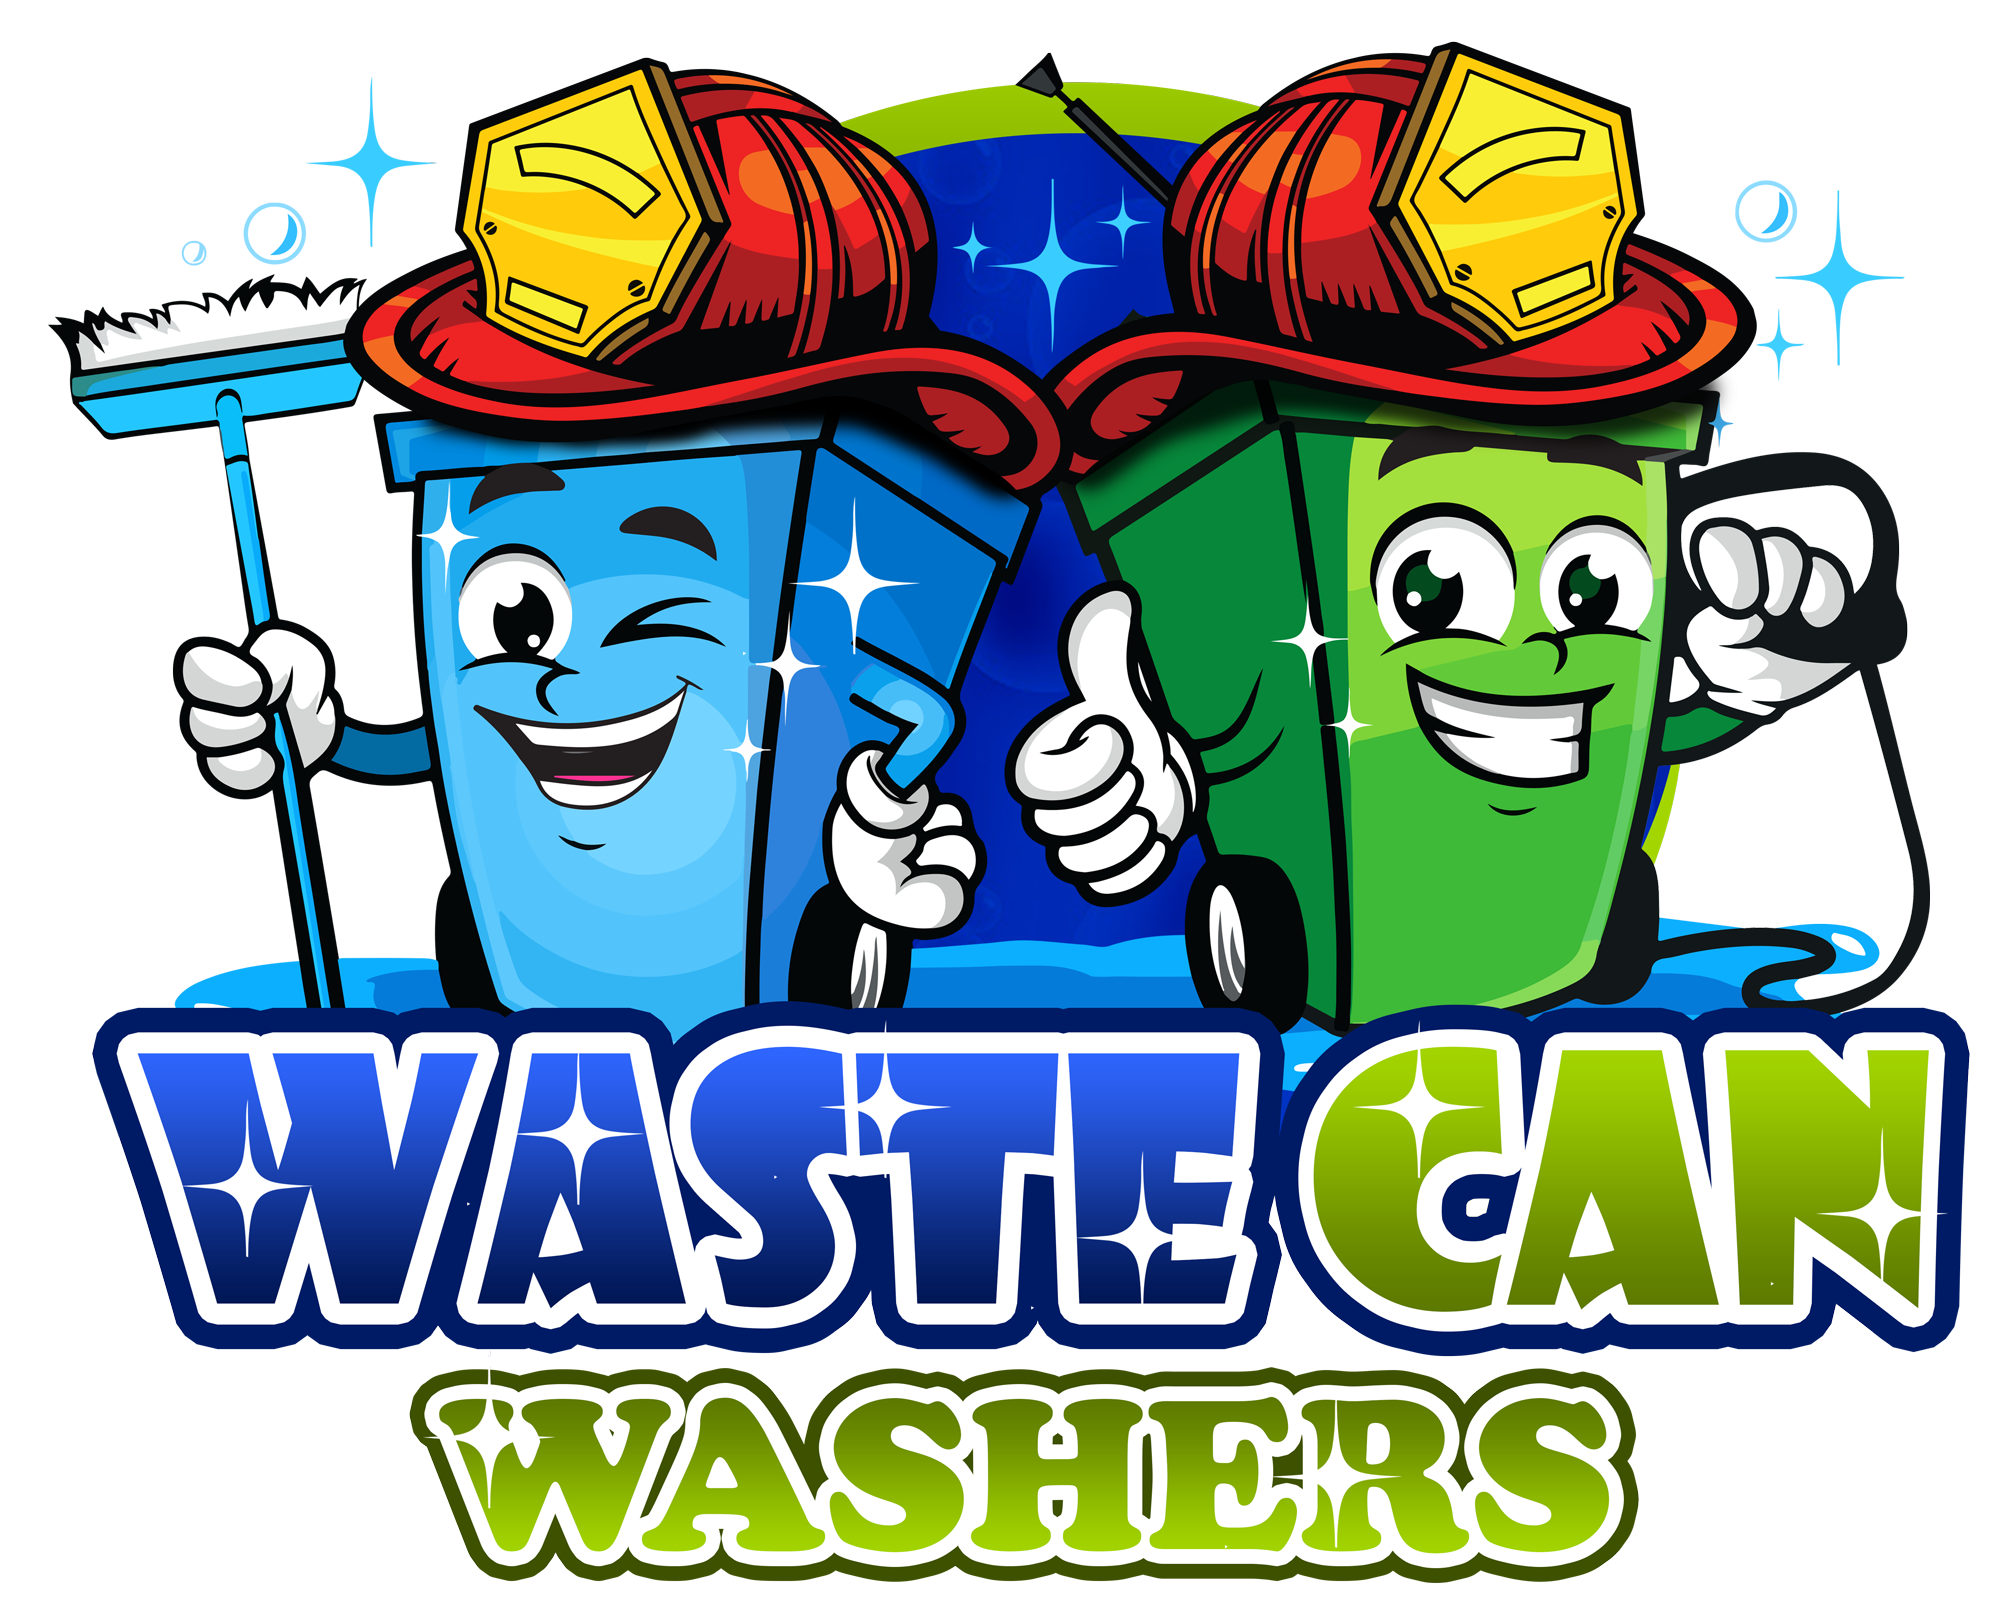 Waste Can Washers